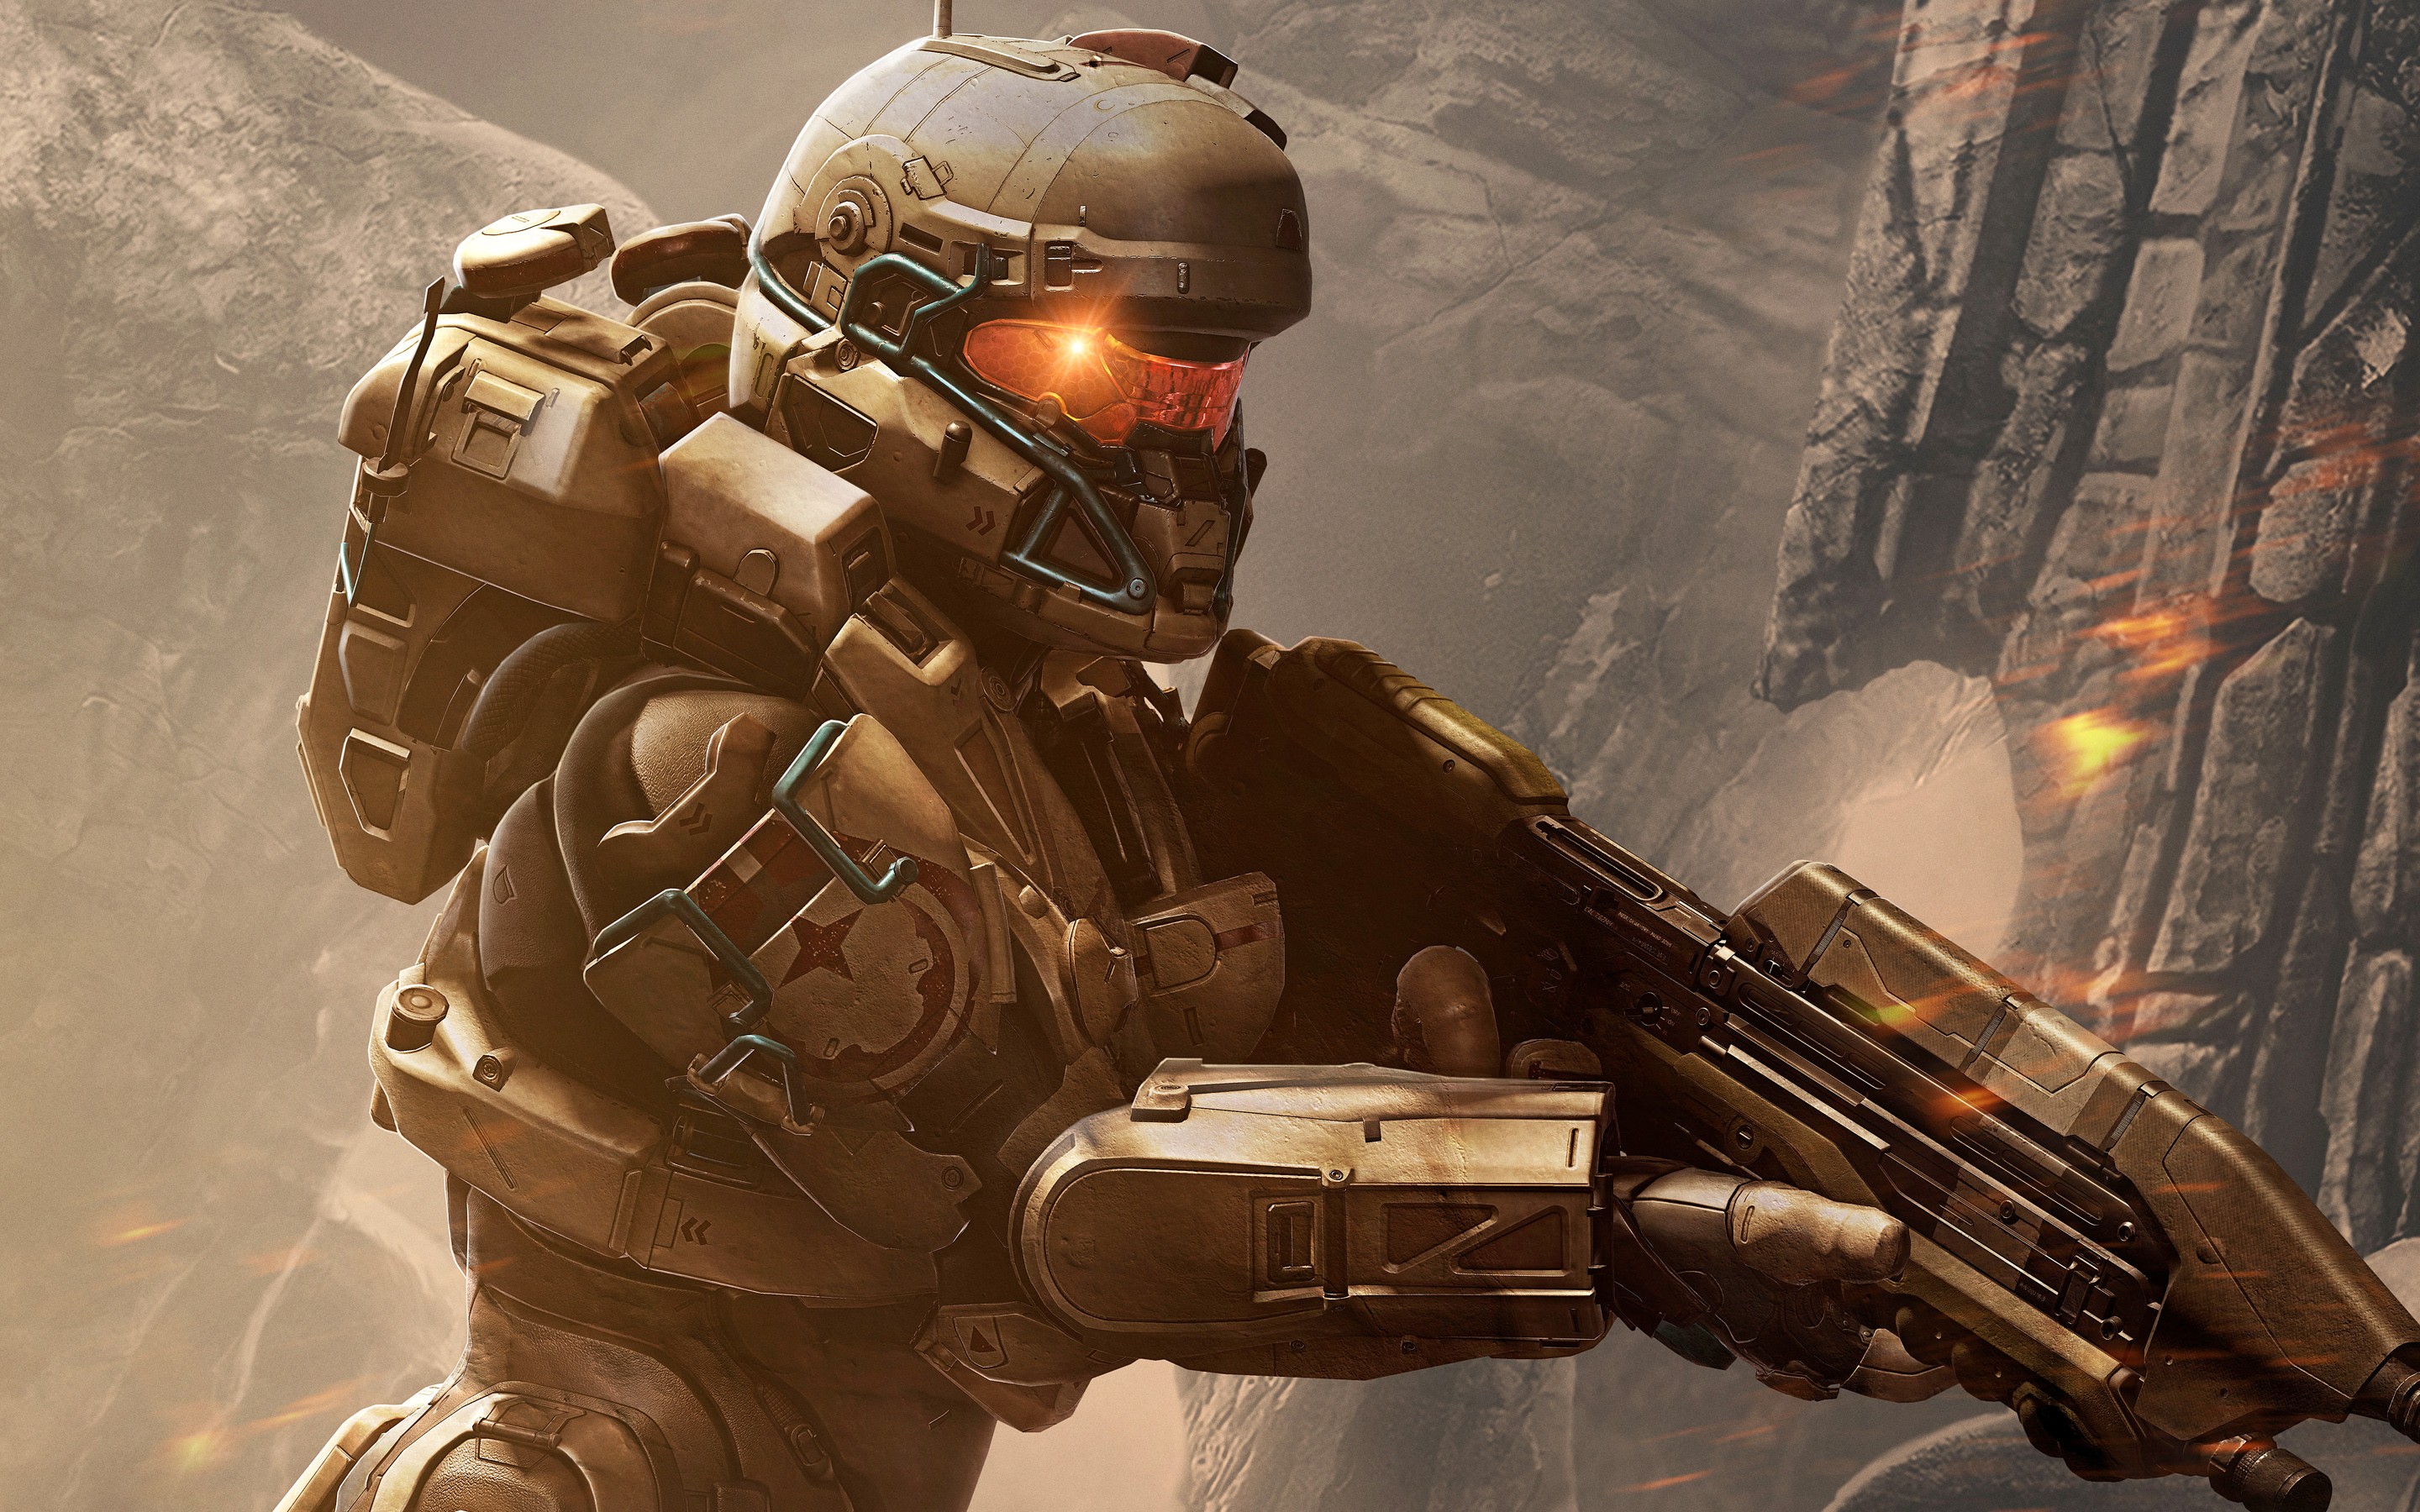 Halo 5 Video Game Heroes Armored Video Games Weapon Science Fiction 2880x1800